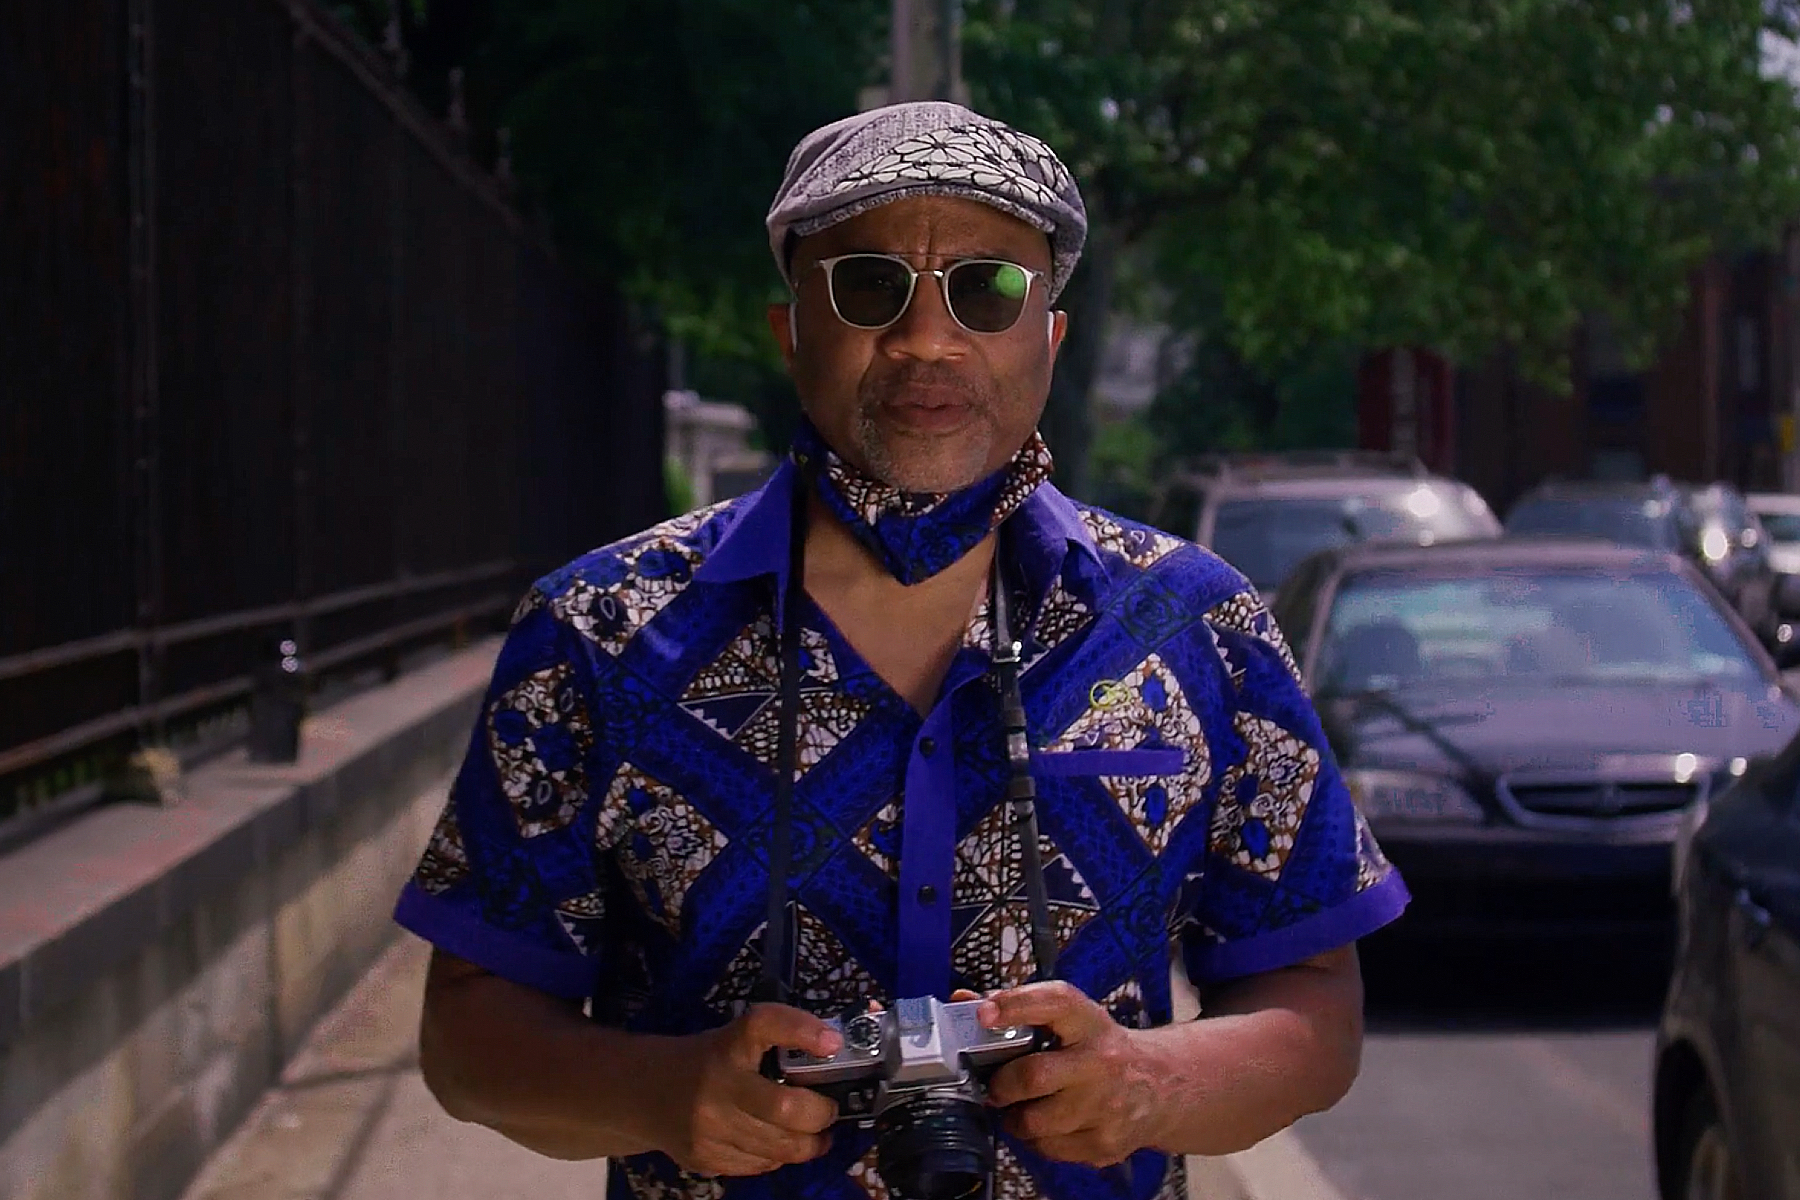 Professor Guy Ramsey standing on sidewalk with cars in street next to him, wearing a cap, sunglasses, and a mask under his chin, holding a camera.